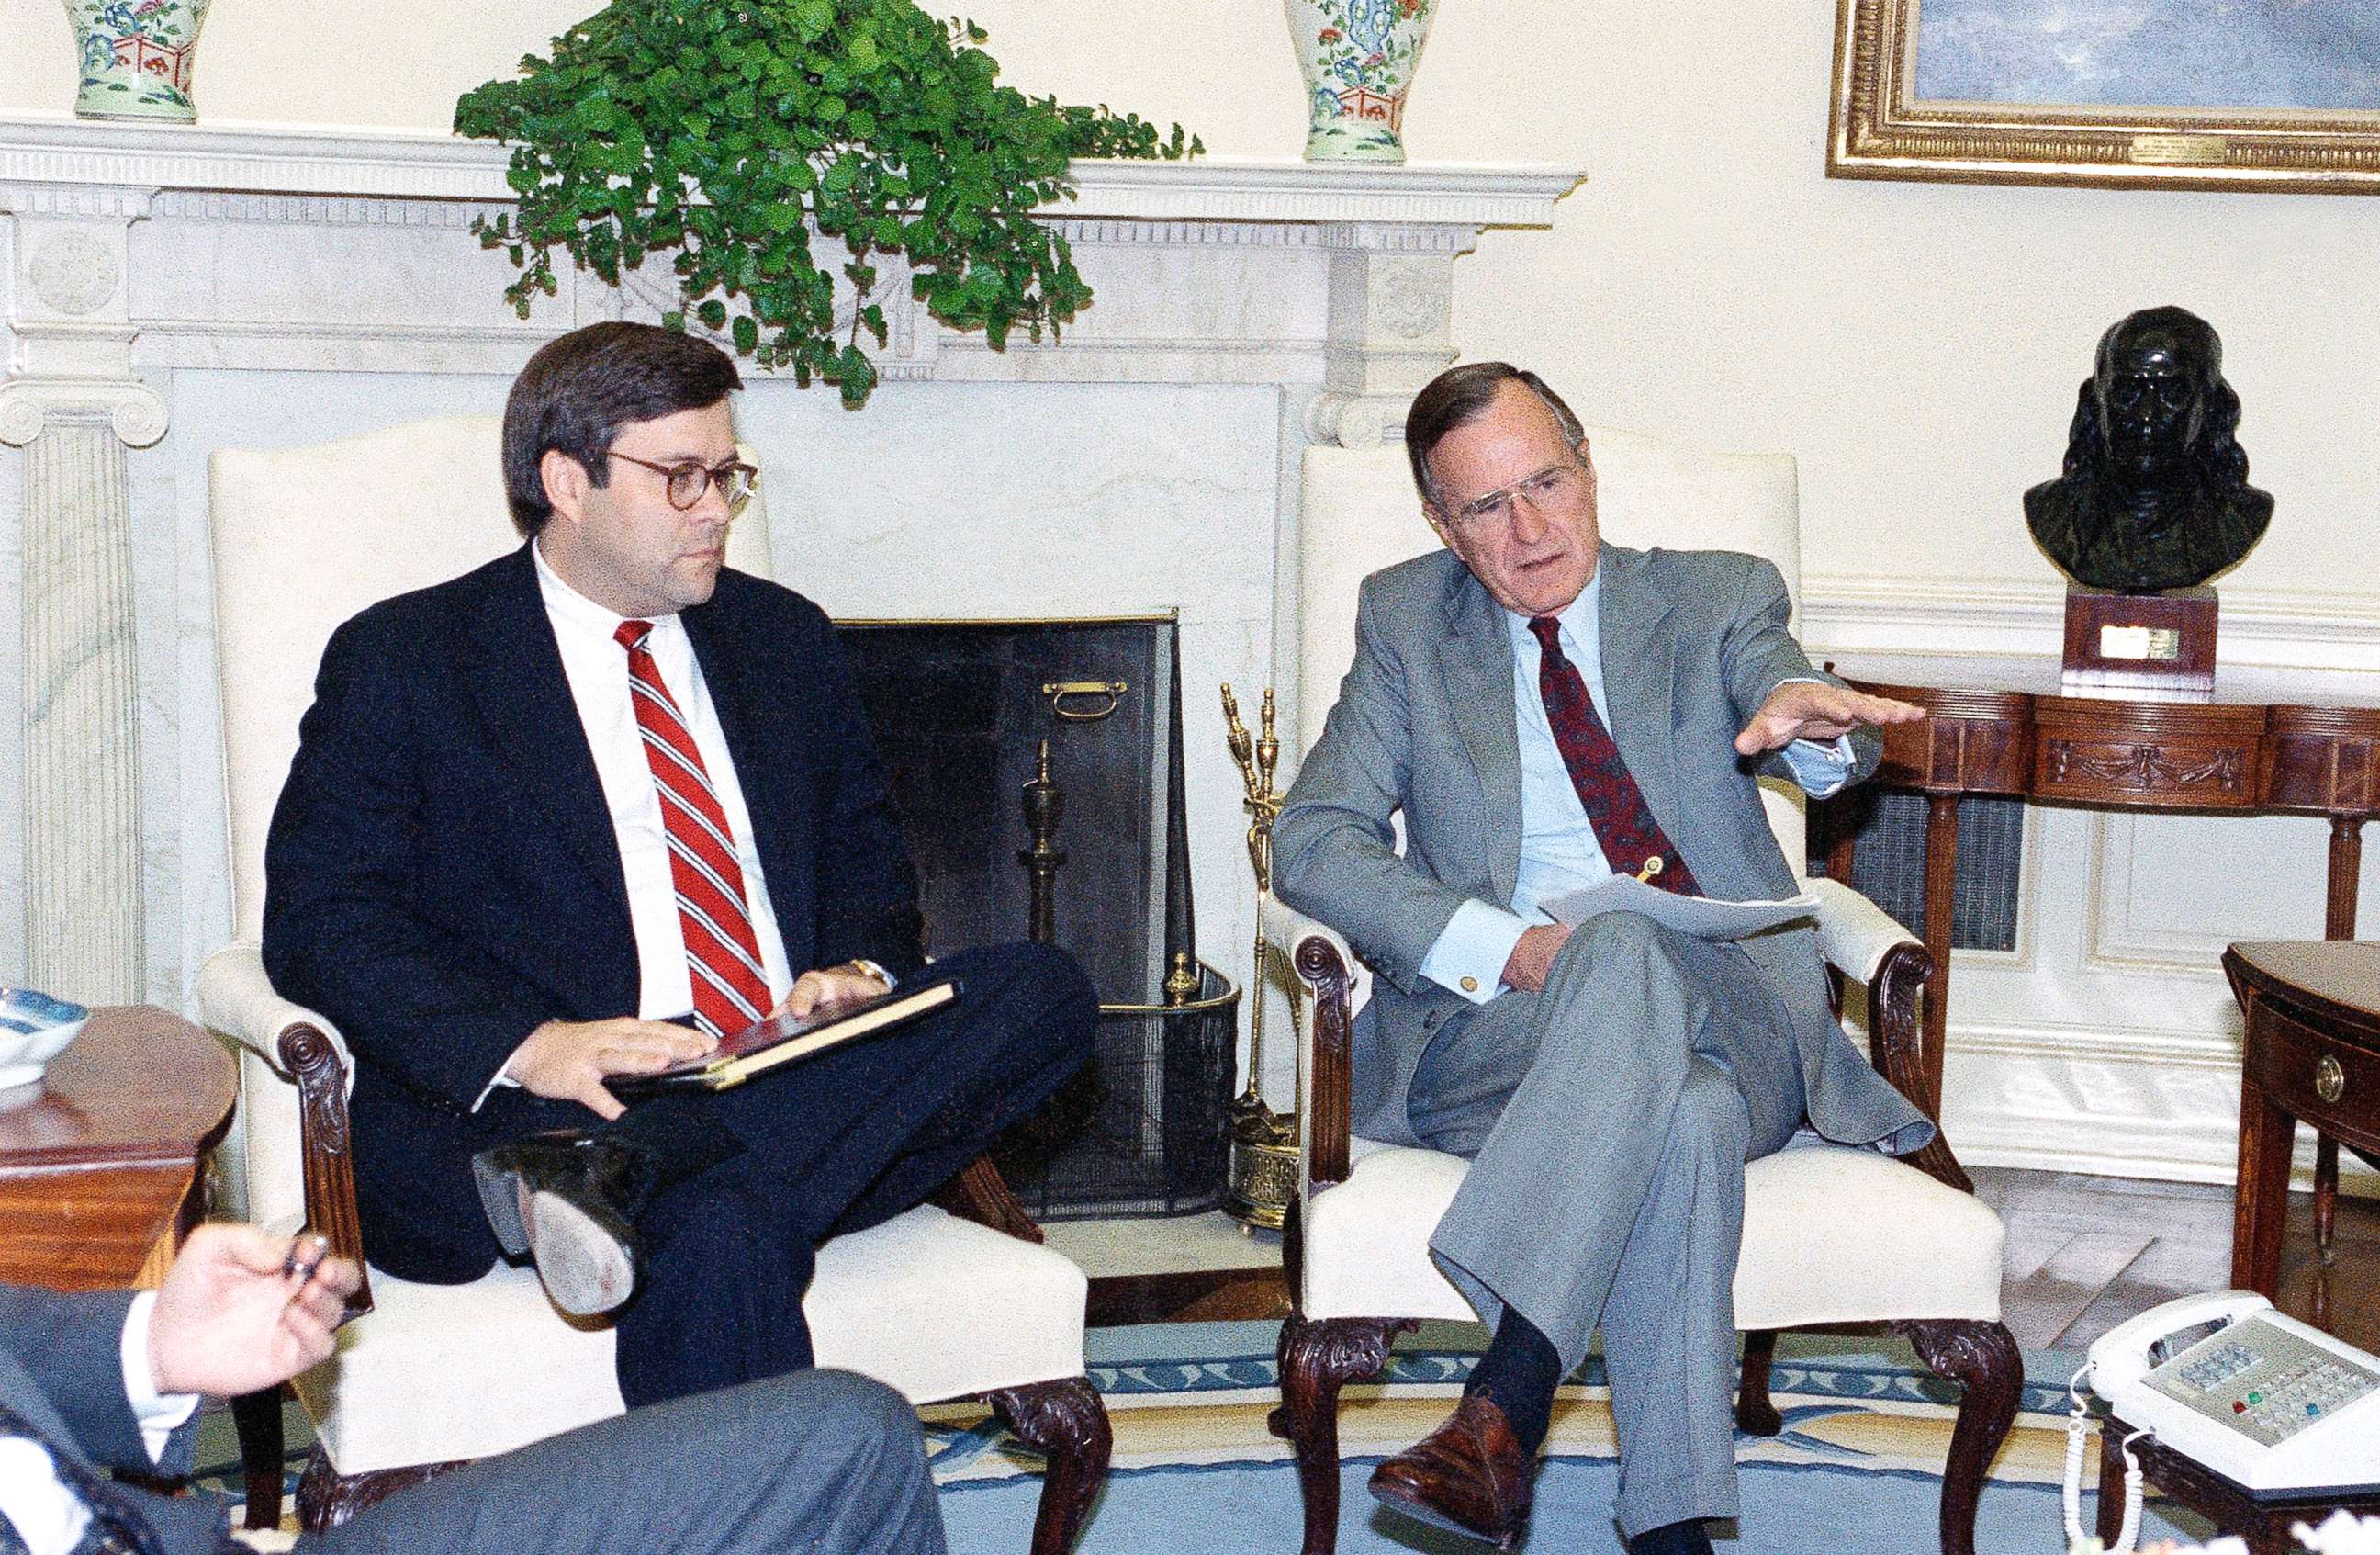 PHOTO: President George H. Bush gestures while talking to Attorney General William Barr in the Oval Office of the White House, May 4, 1992 in Washington.